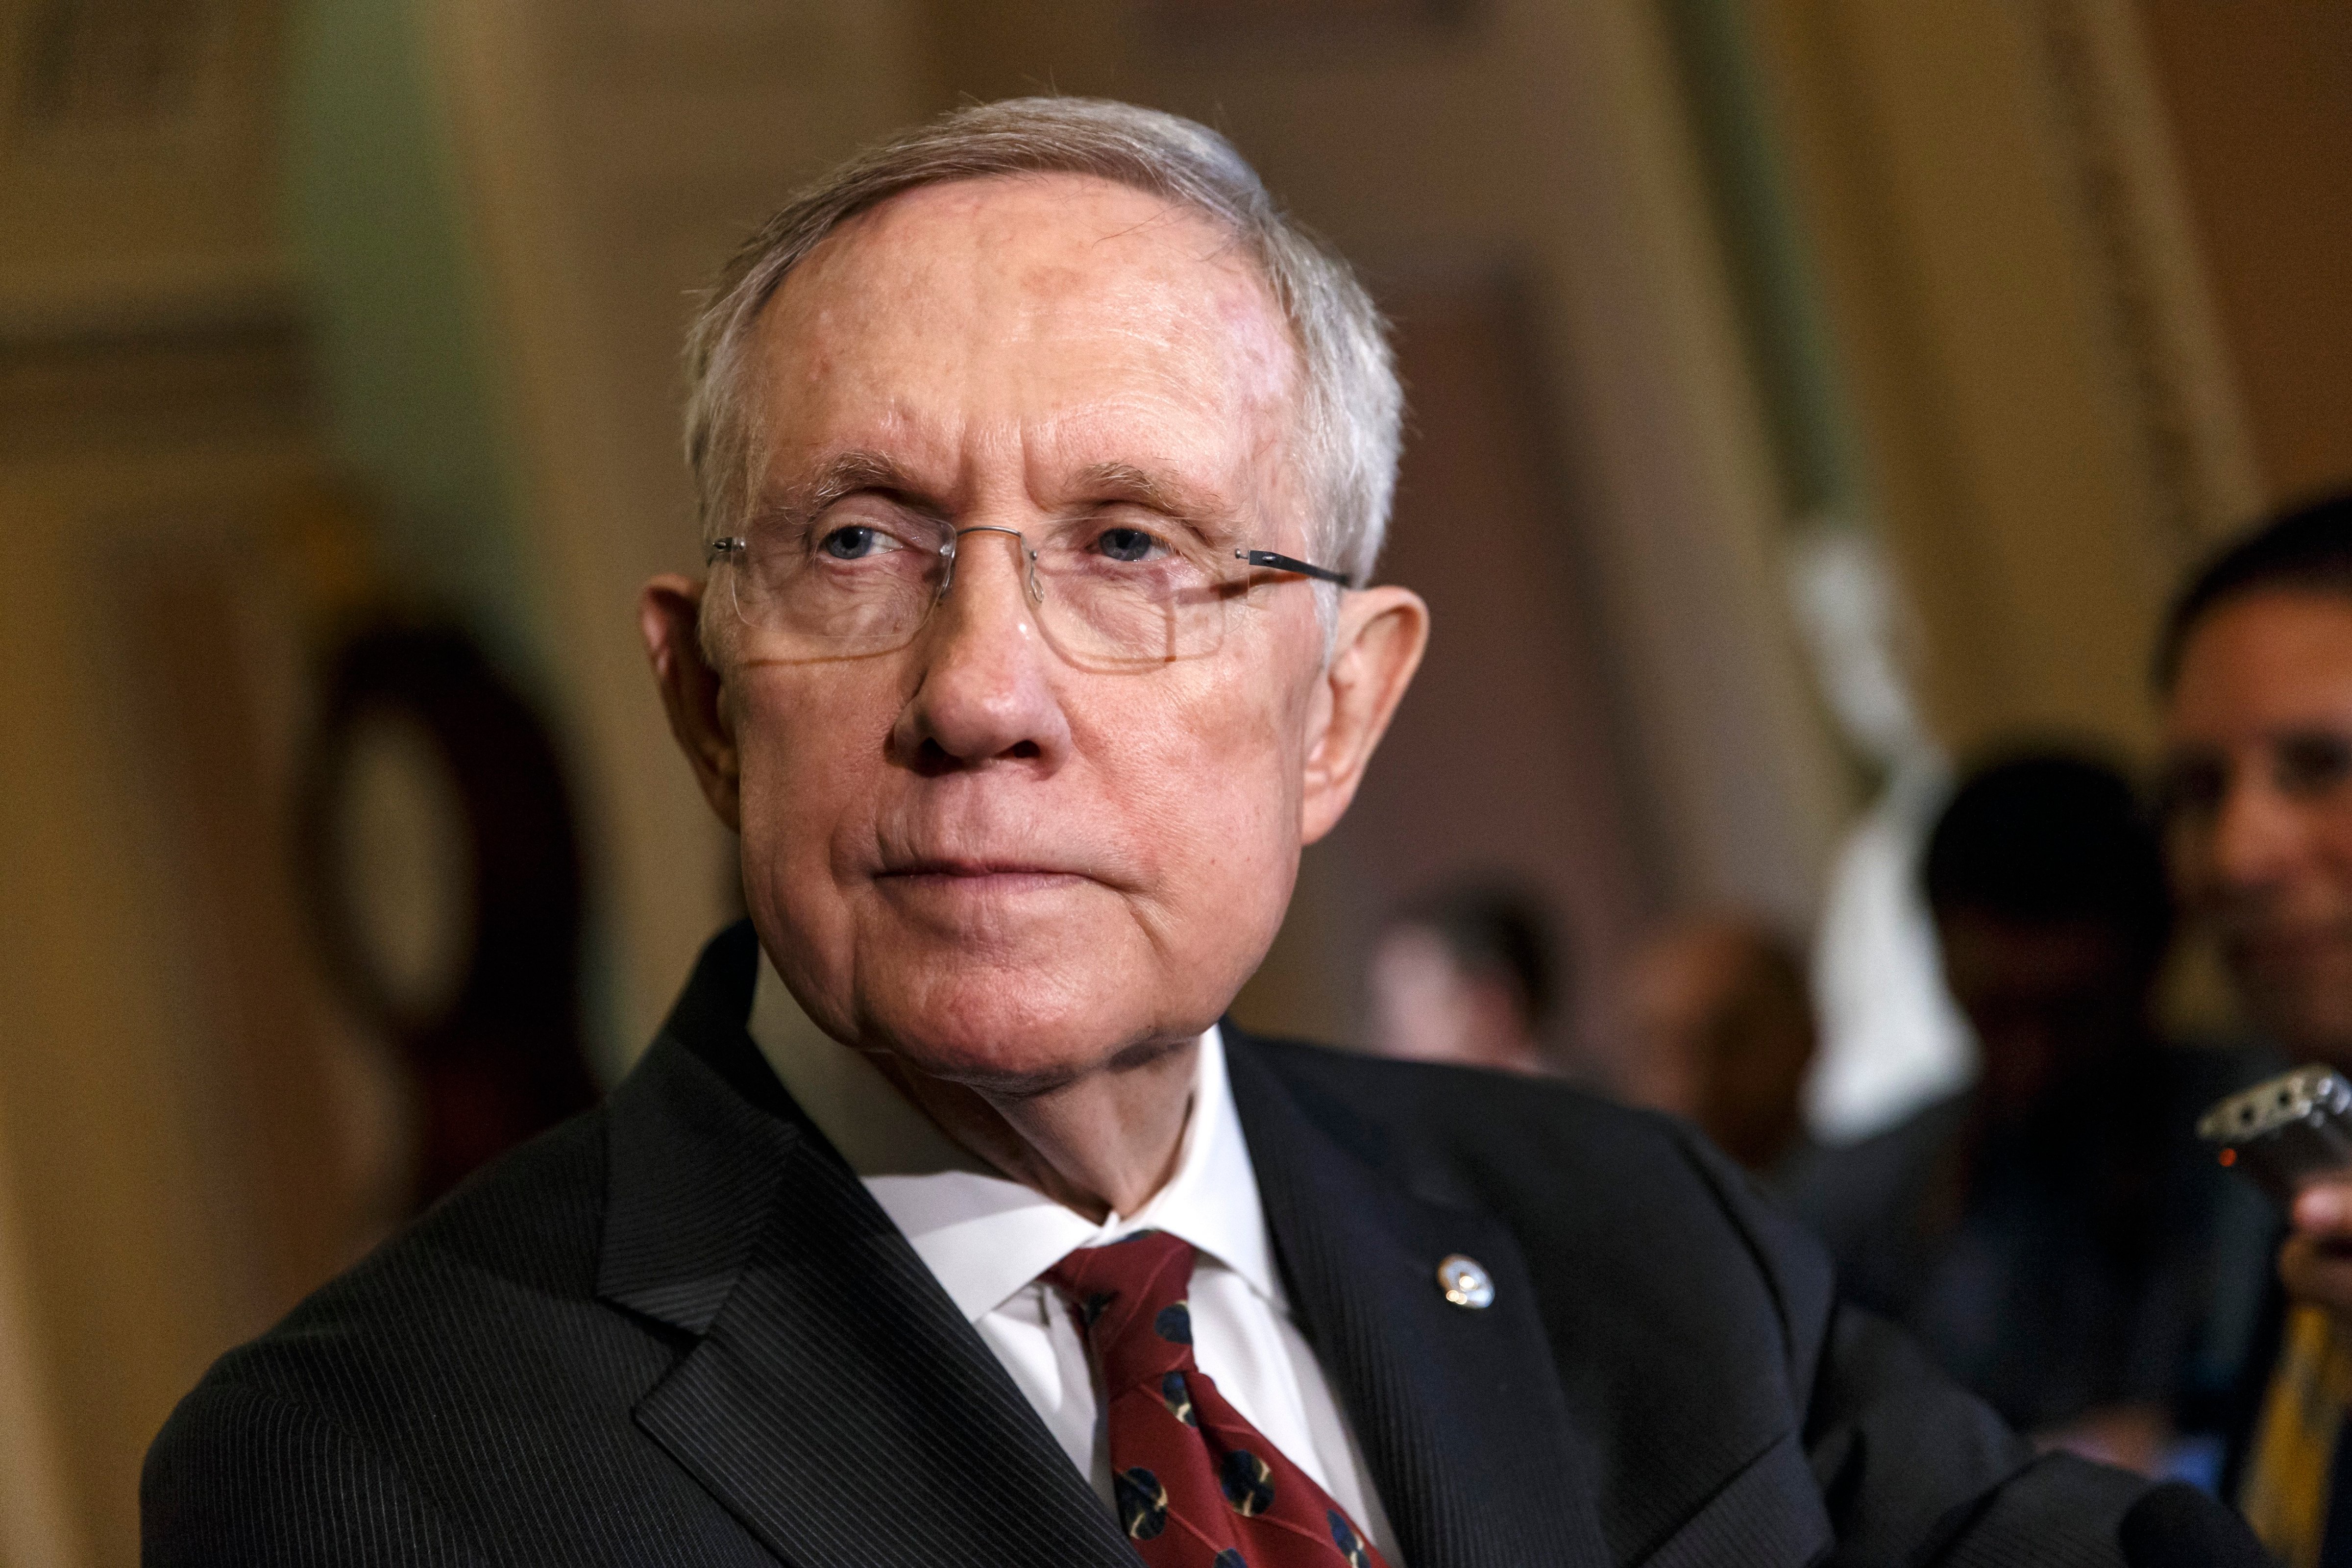 Senate Majority Leader Harry Reid talks to reporters as Congress returns from a two week recess, at the Capitol in Washington on April 29, 2014. (AP)